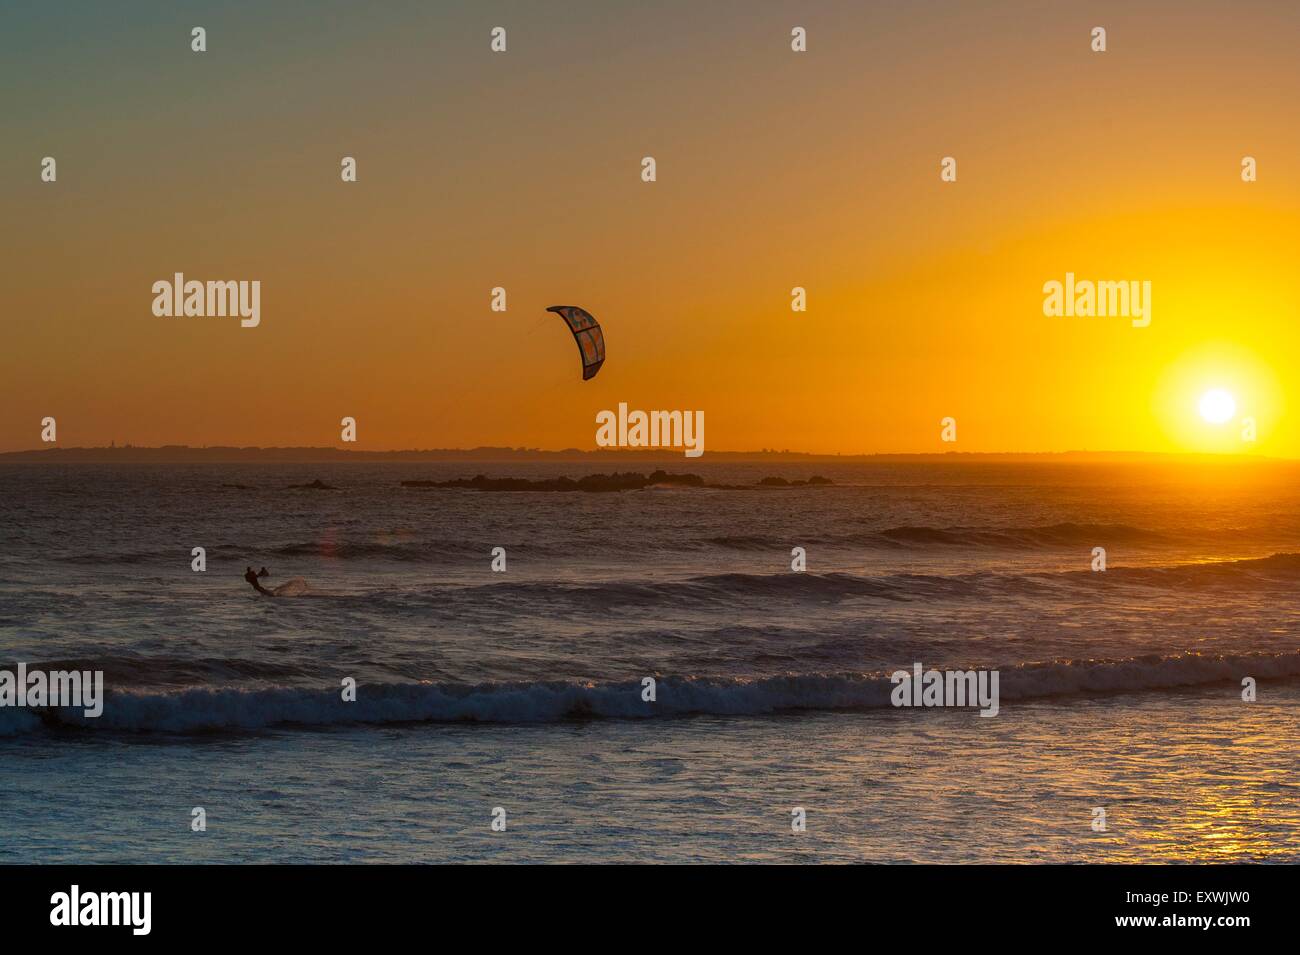 Kitesurfer in Bloubergstrand at sunset, Cape Town, South Africa Stock Photo